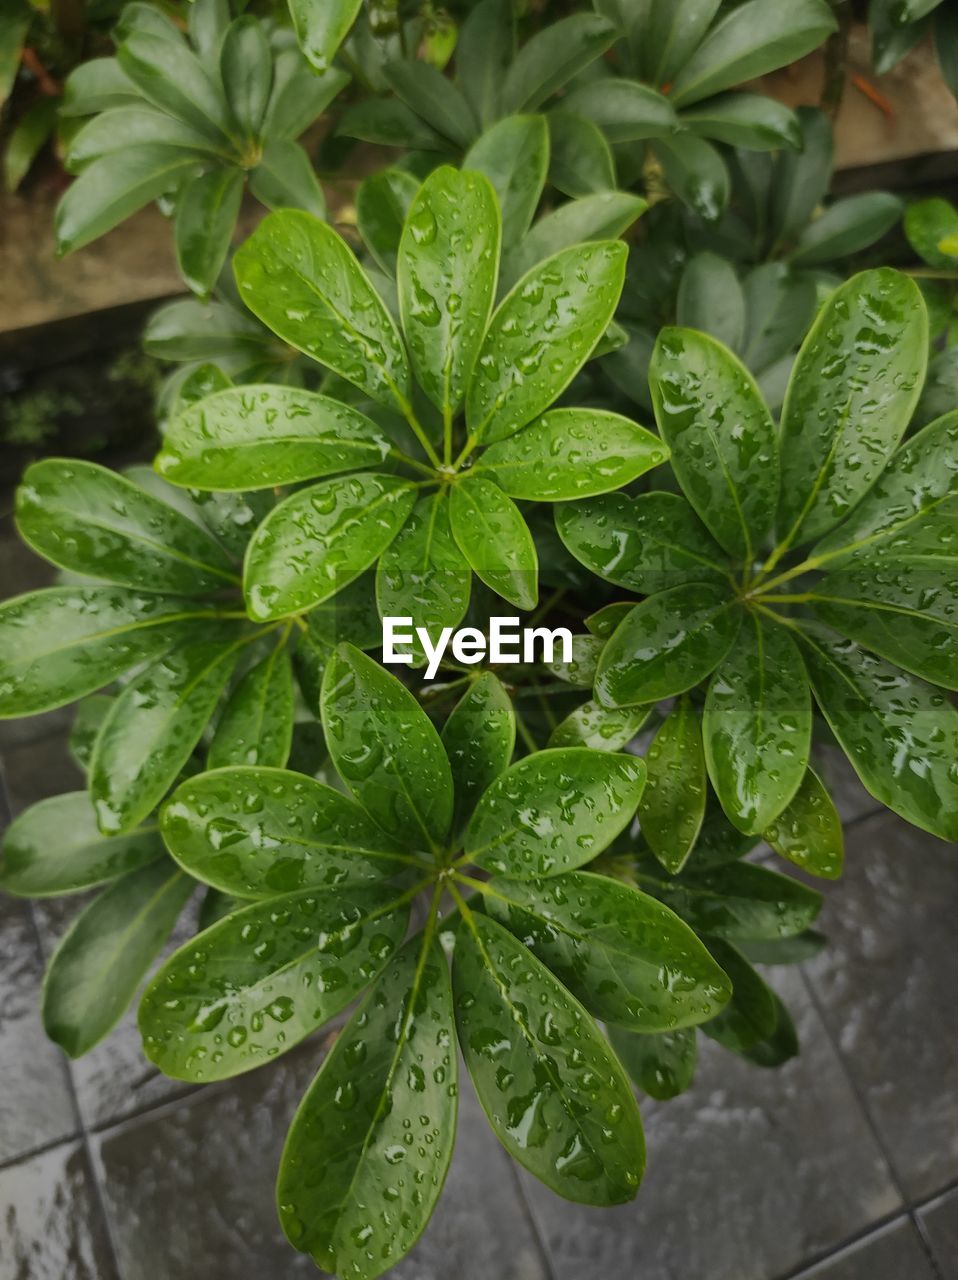 leaf, plant, plant part, green, nature, food and drink, growth, flower, food, freshness, close-up, water, wet, herb, beauty in nature, drop, no people, outdoors, high angle view, healthcare and medicine, medicine, day, botany, alternative medicine, potted plant, rain